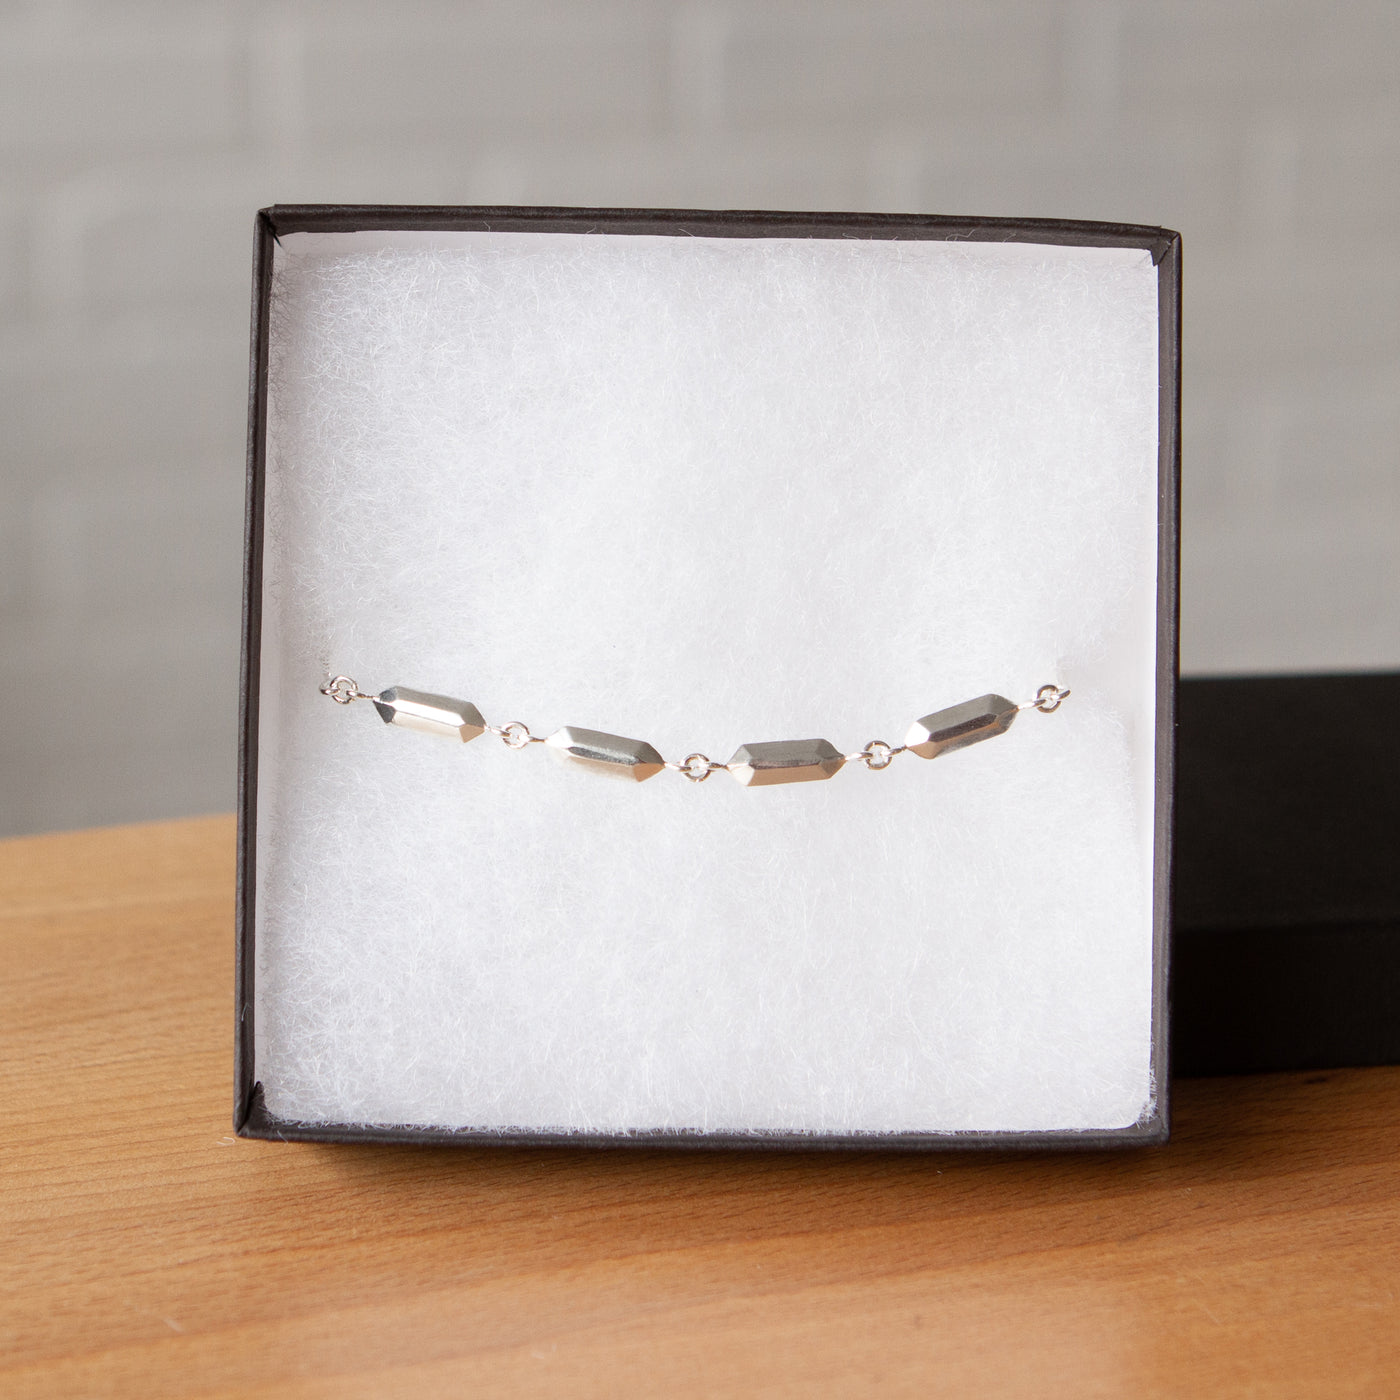 Fragment Link Bracelet in Silver on a wooden table in packaging 